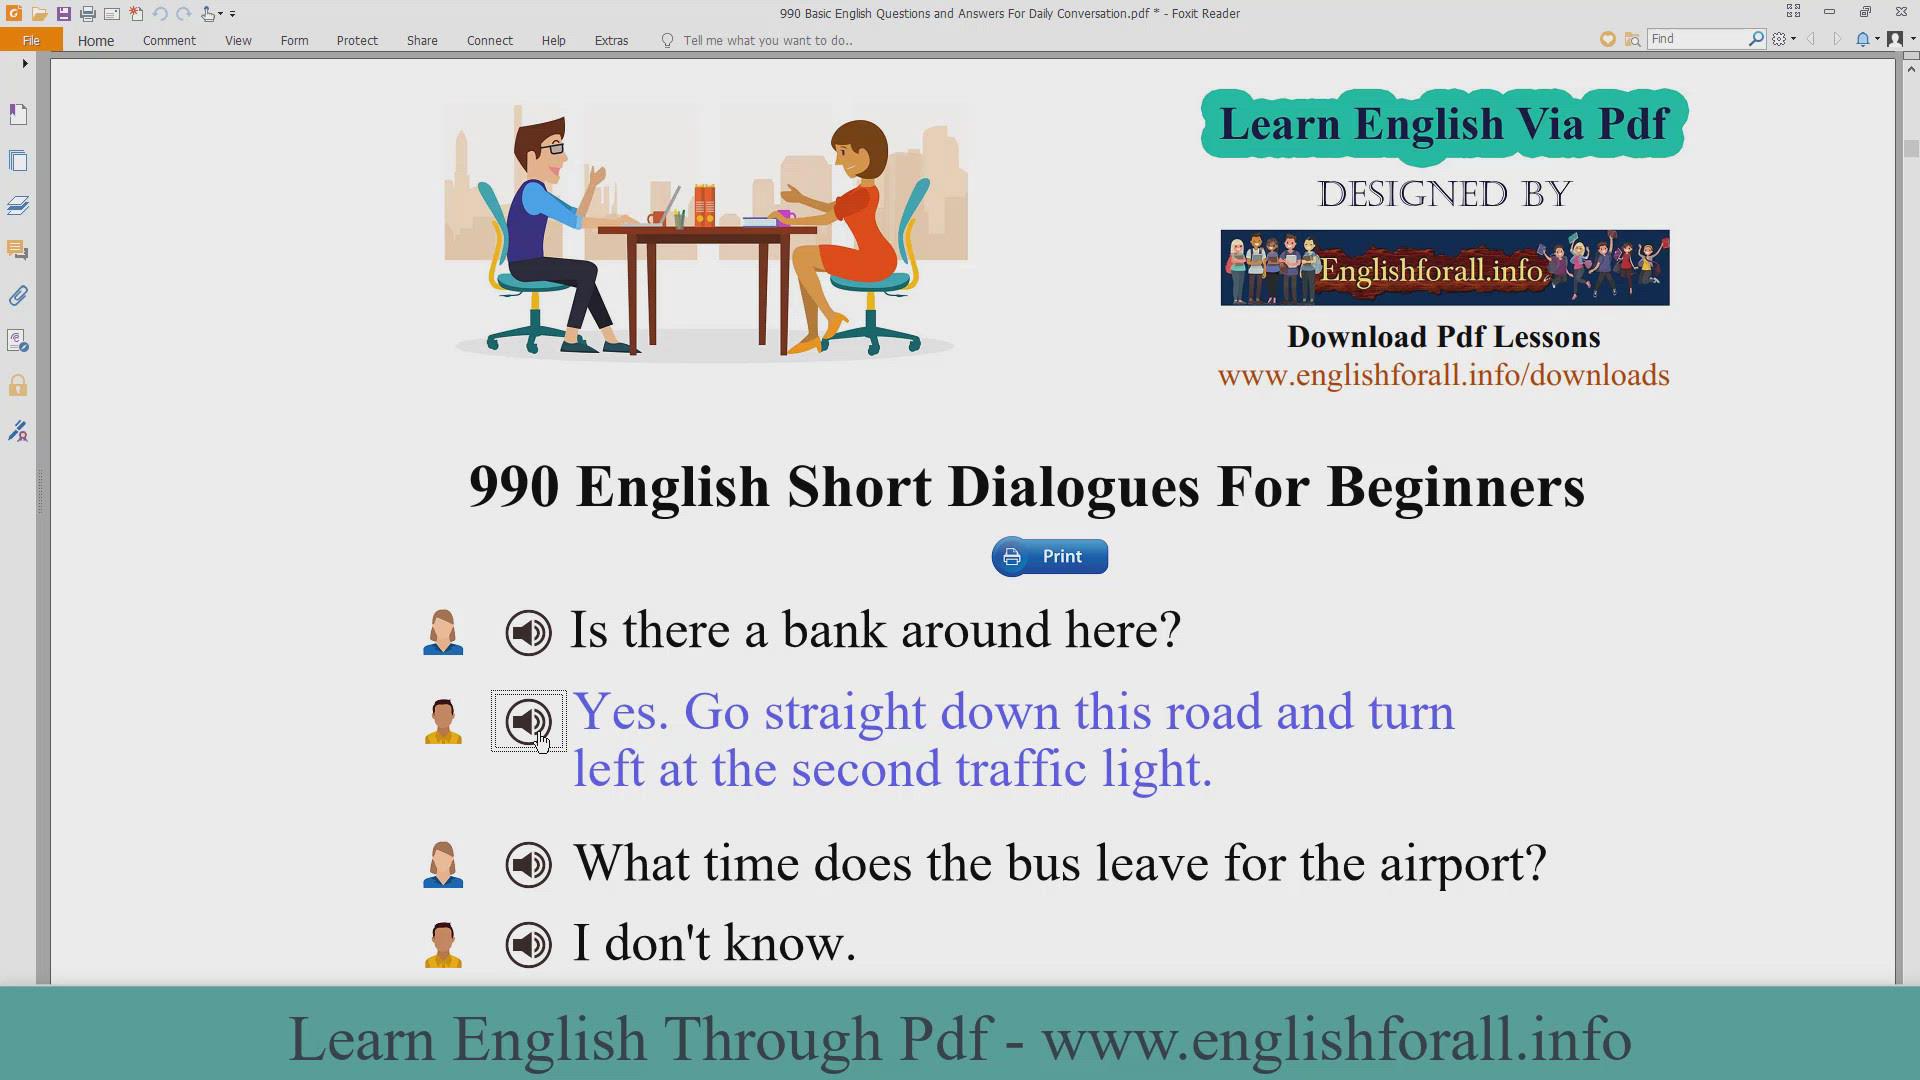 'Video thumbnail for English Questions and Answers For Daily Conversation - Part 08'